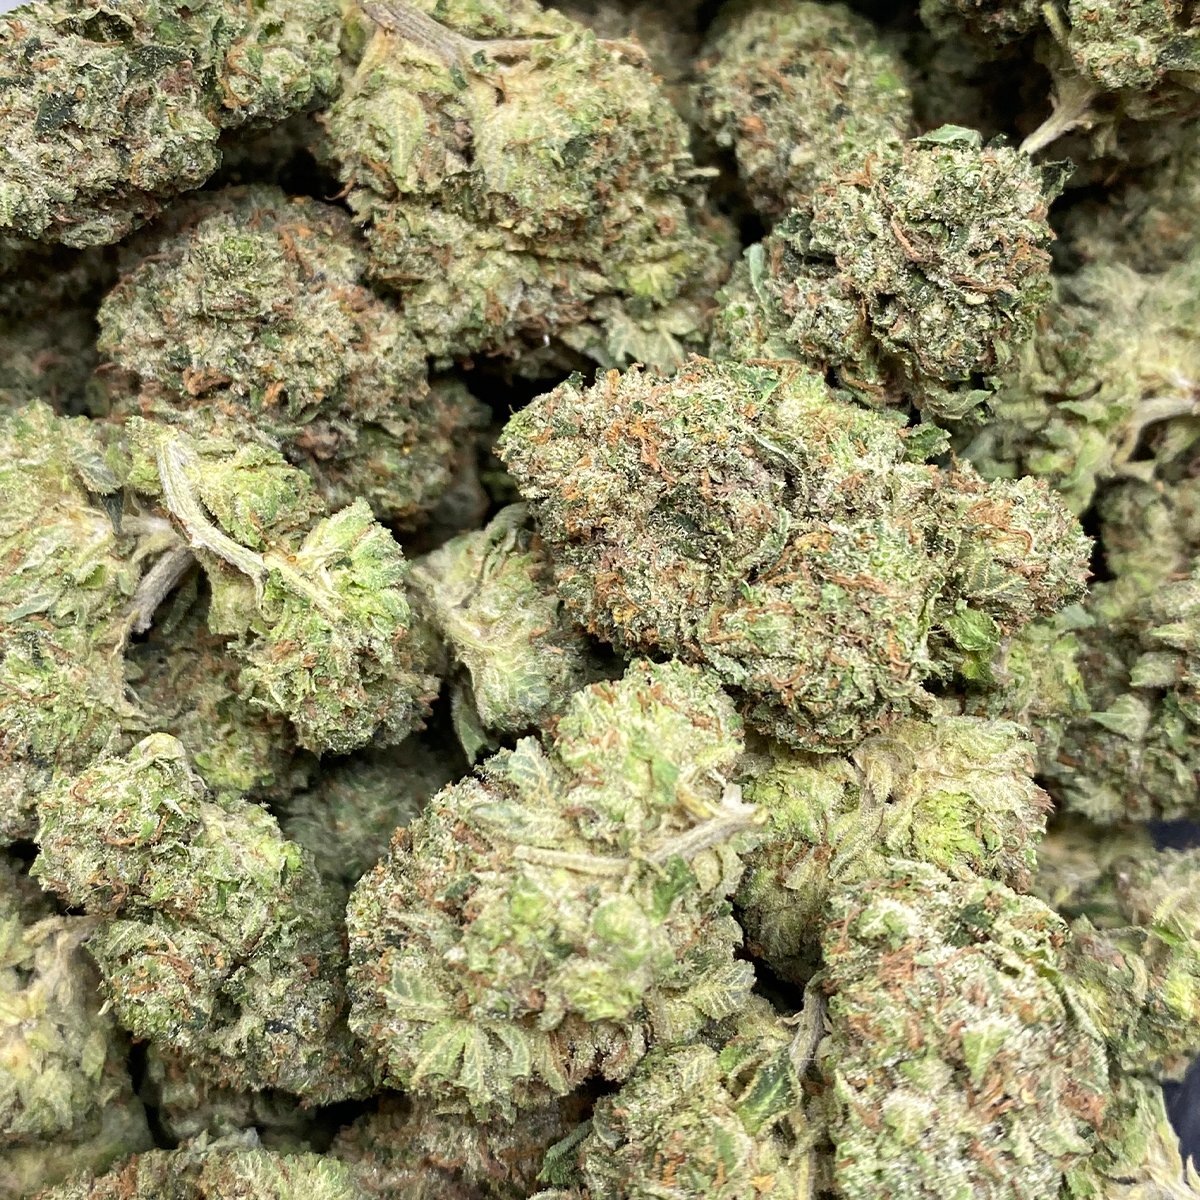 Tom Ford Pink | Buy Weed Online| Dispensary Near Me